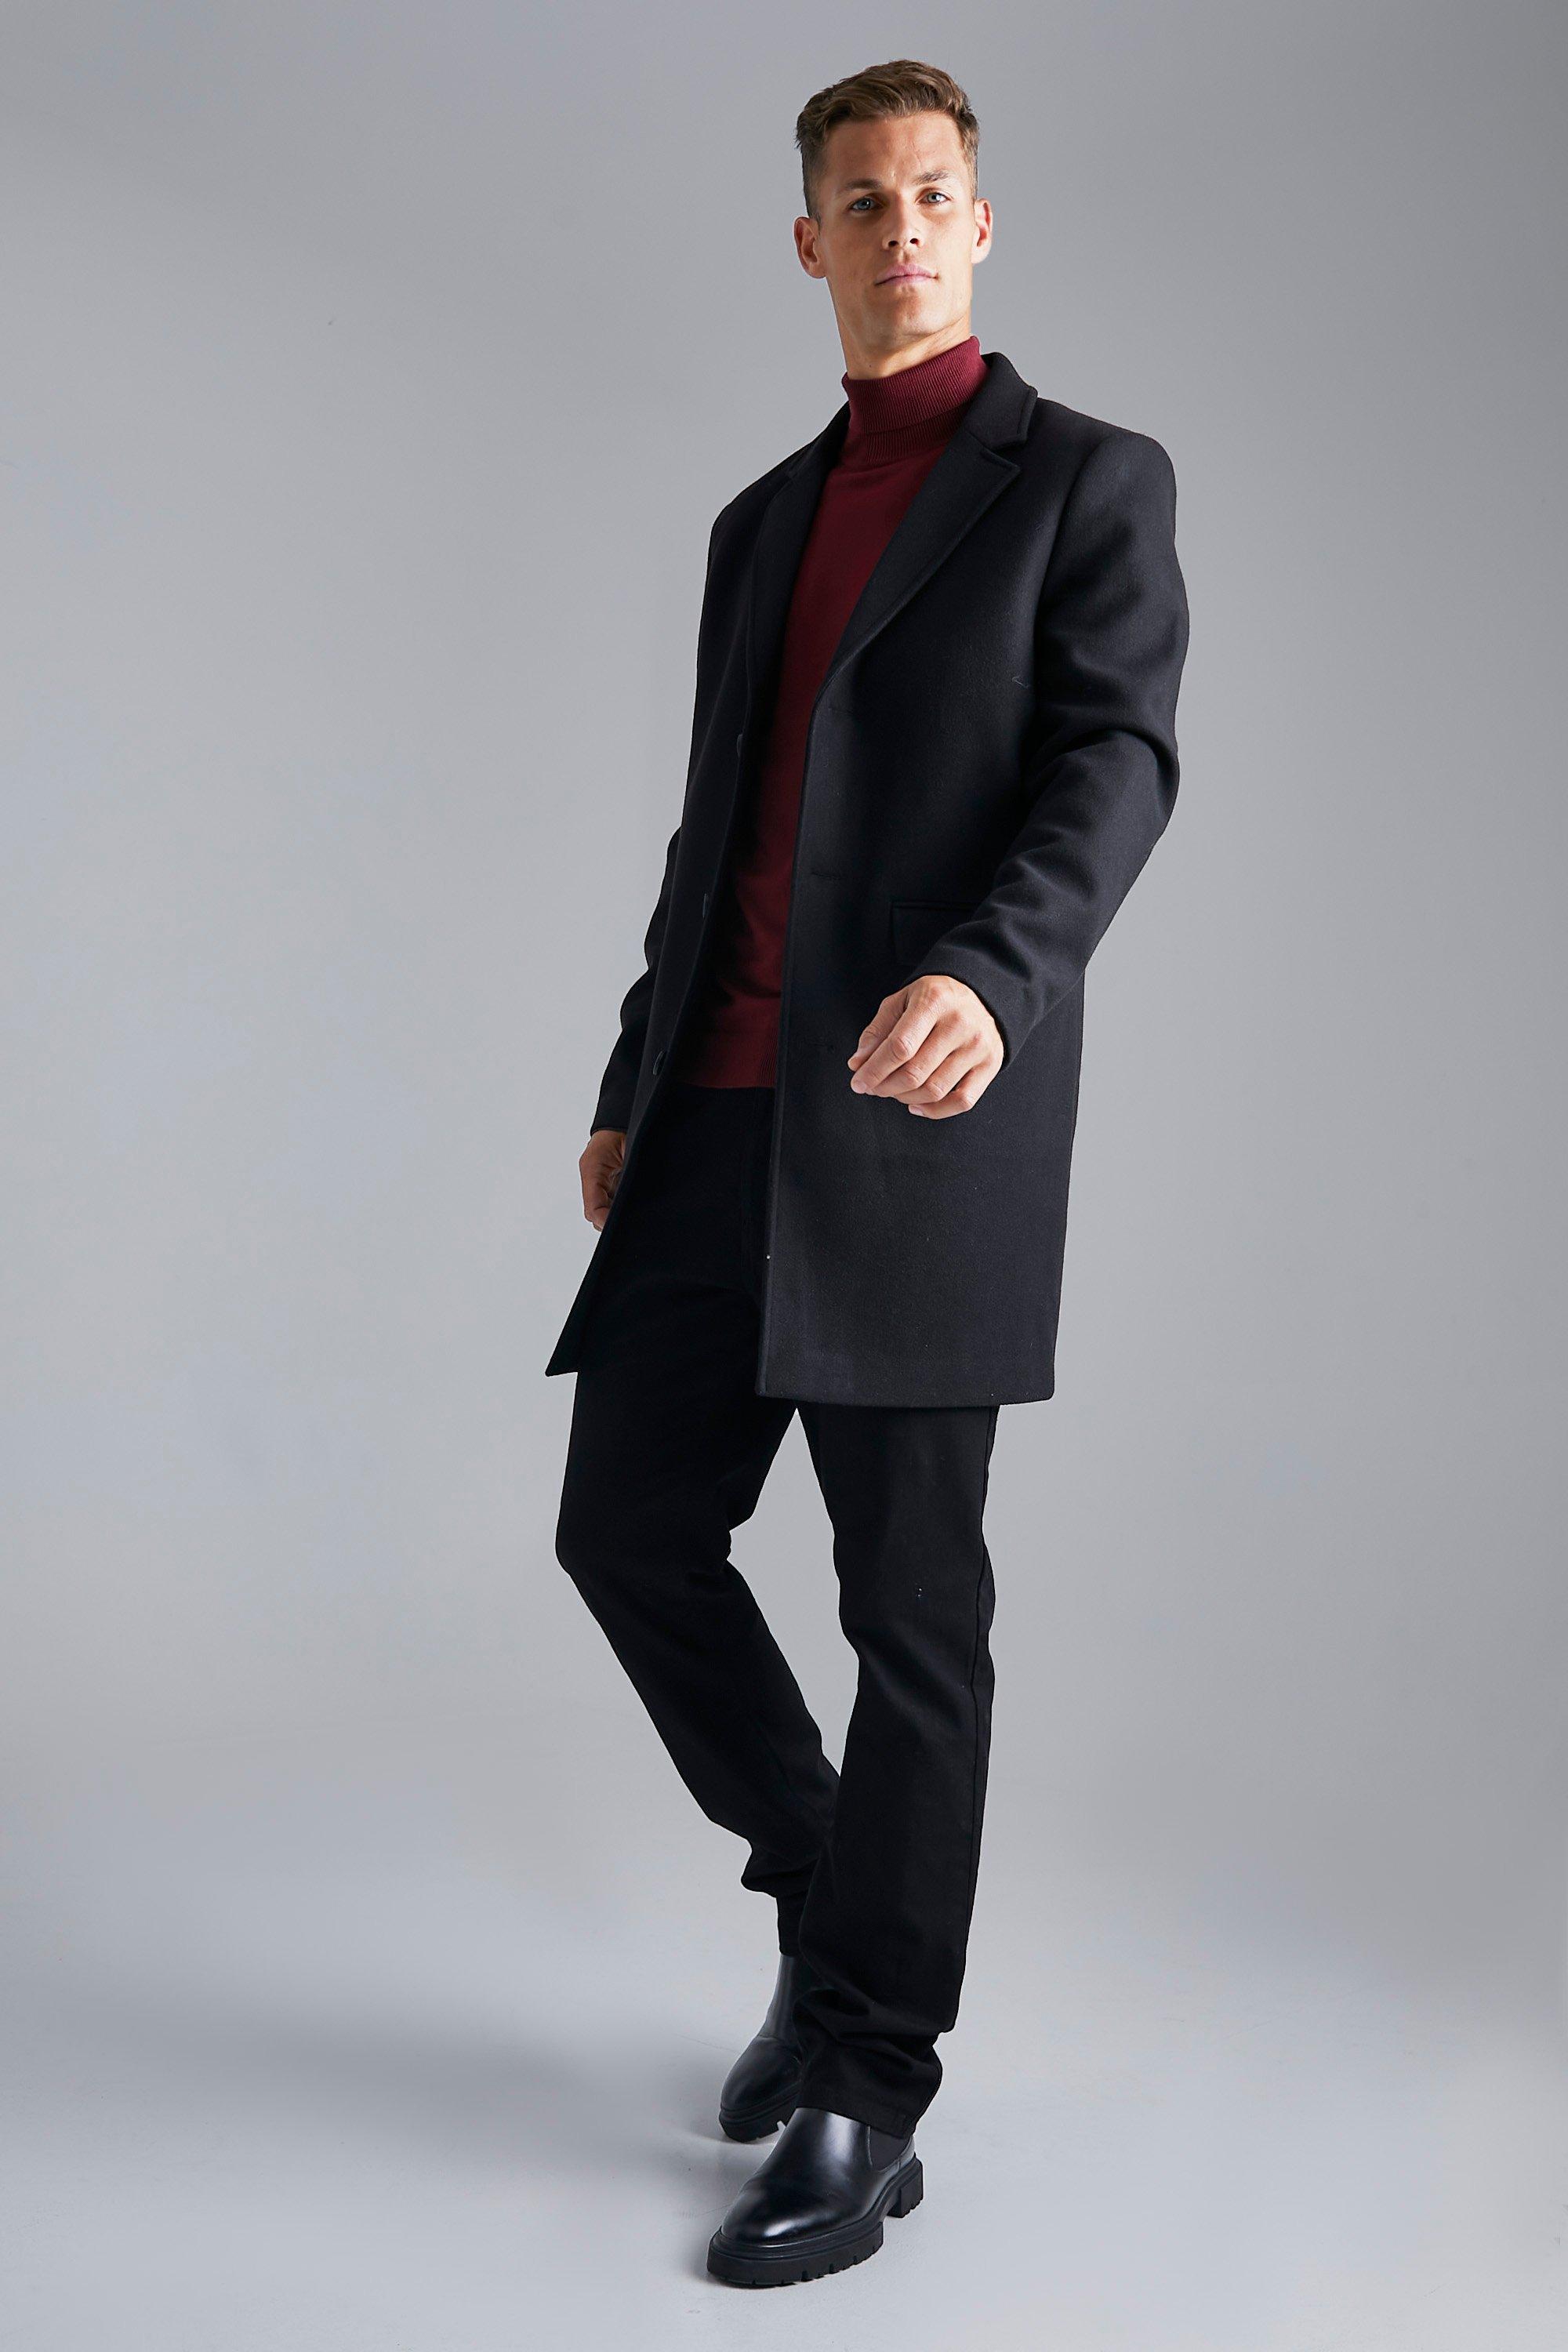 Stylish Wool Black Mens Single Breasted Overcoat - Your Perfect